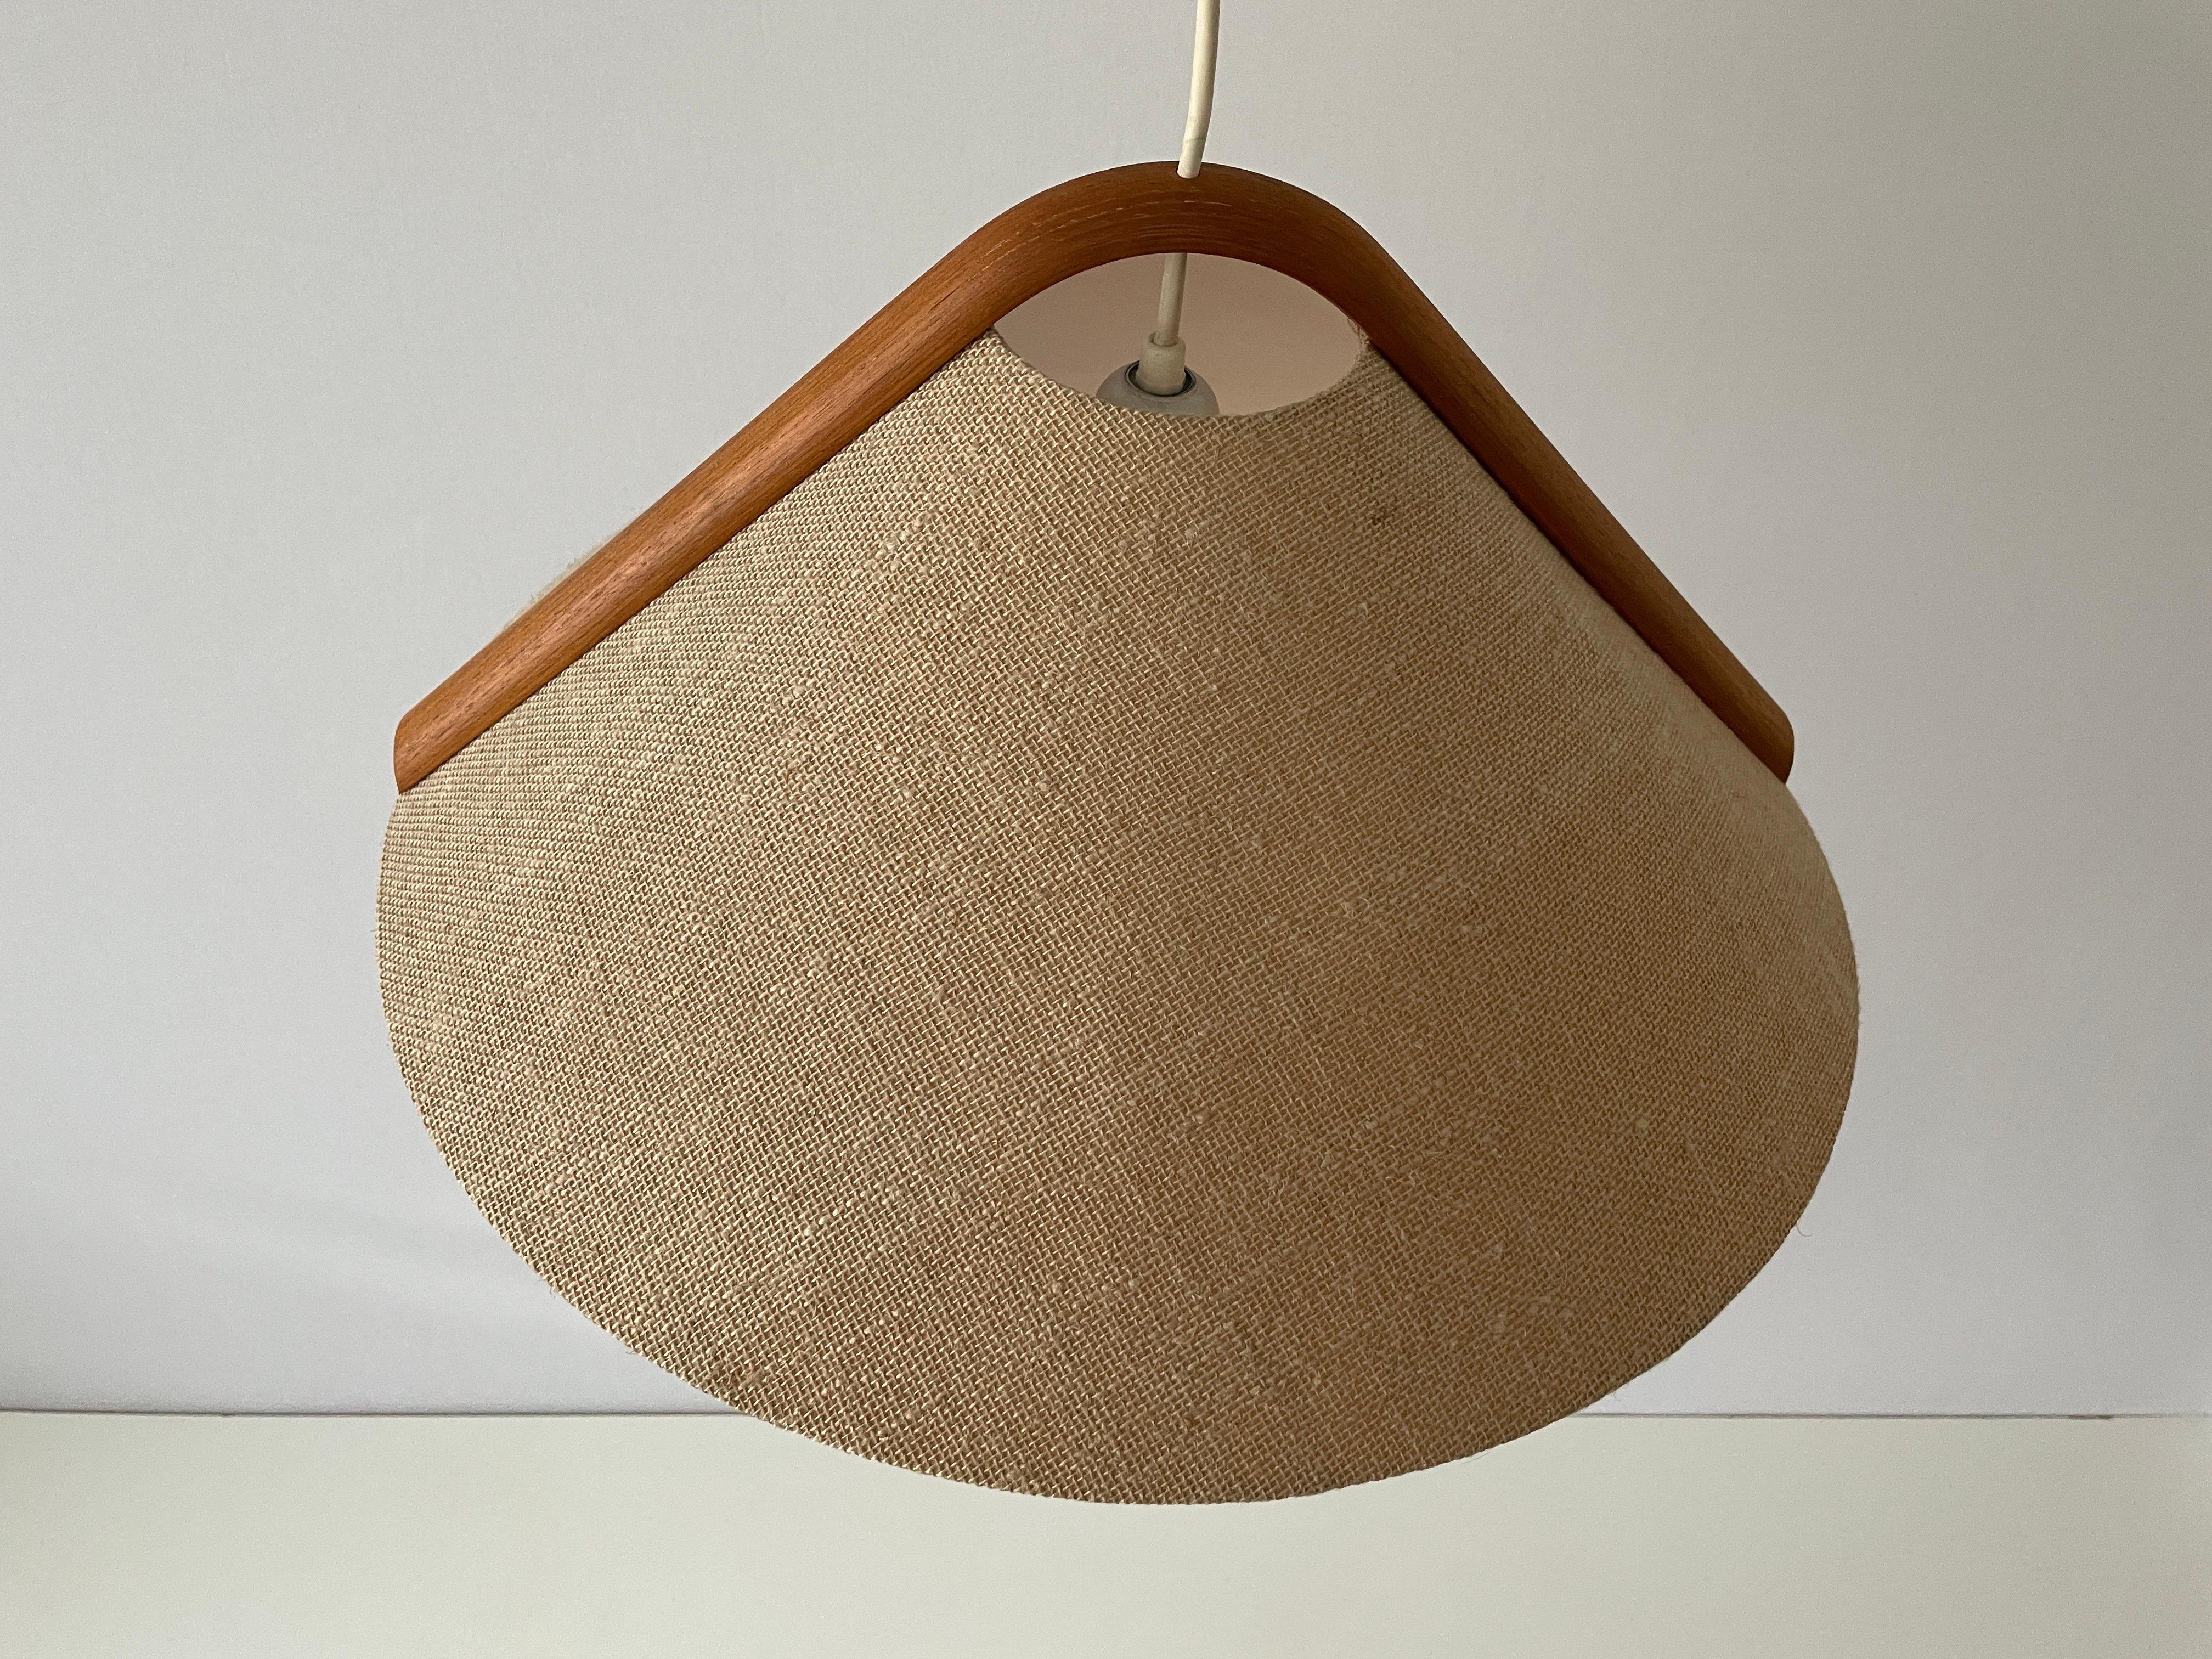 Conic Design Fabric Pendant Lamp with Teak Detail, 1960s, Germany For Sale 1